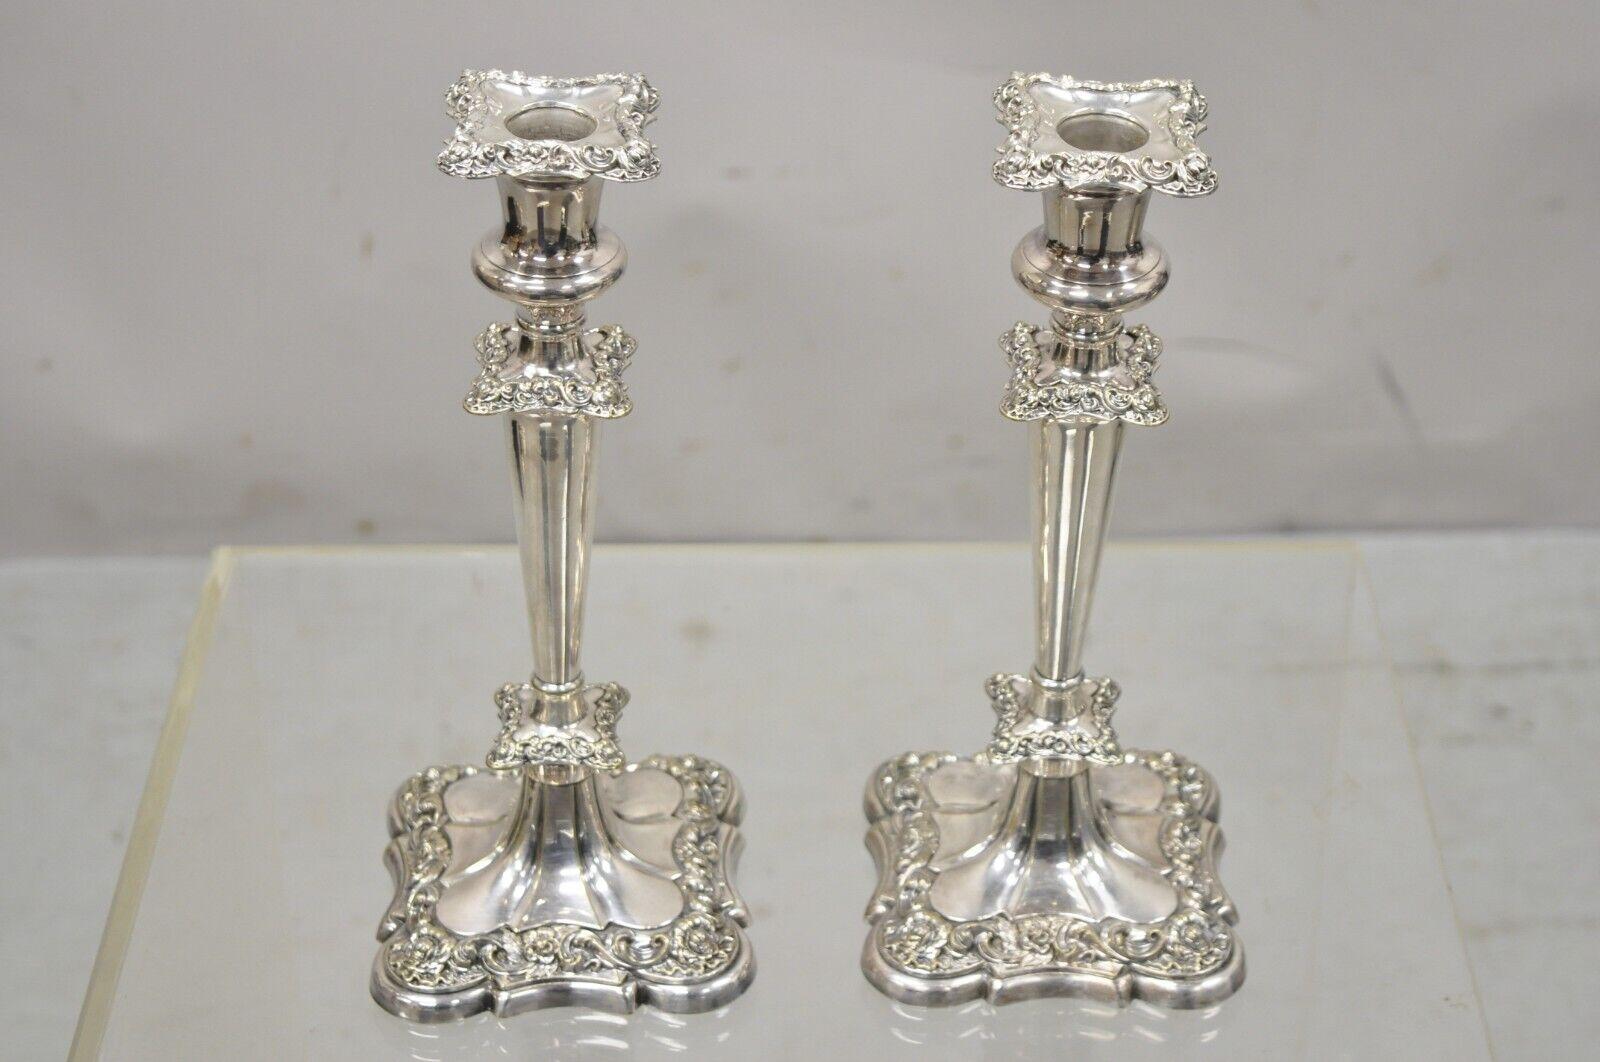 Antique Gorham Floral Repousse Silver Plate Candlestick Candle Holder a Pair 6